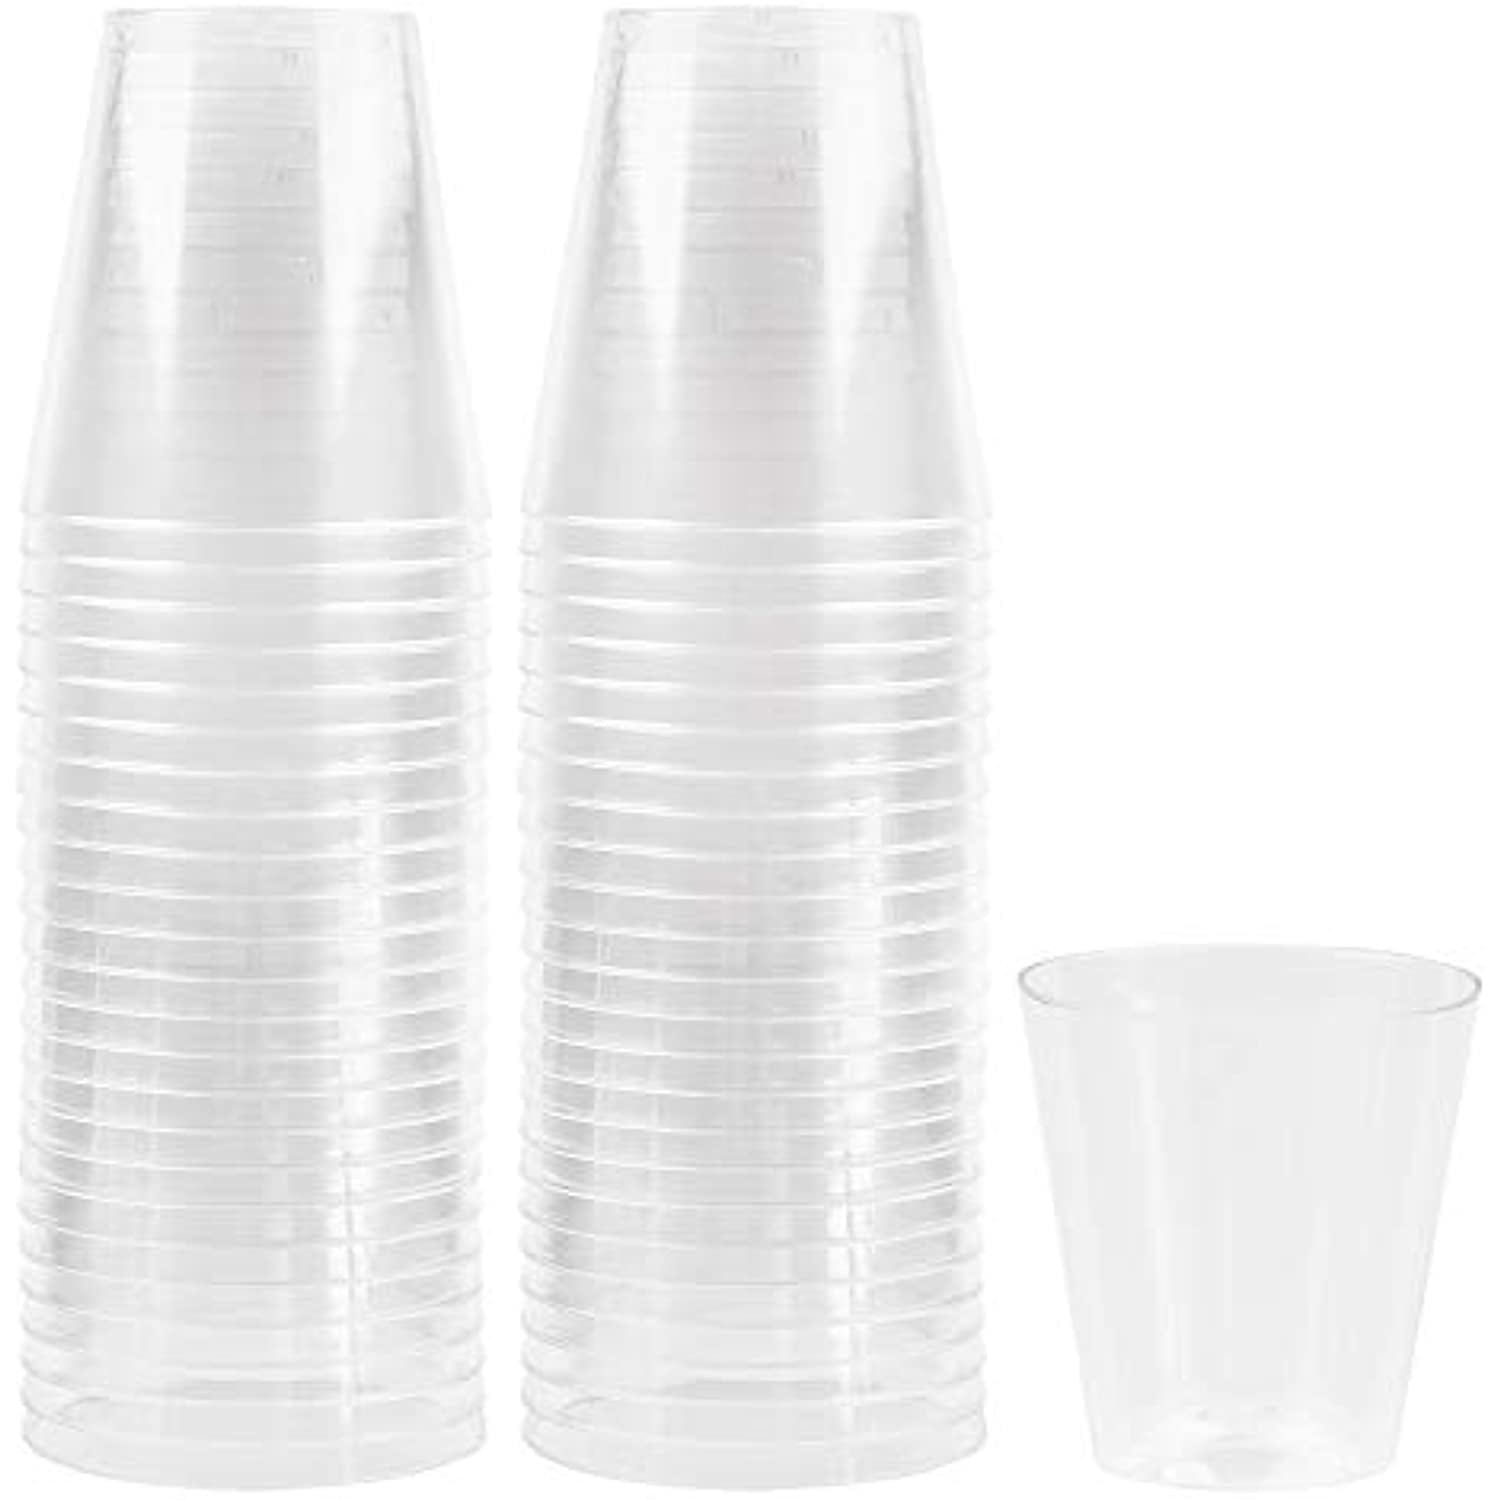 Sauce Great for Whiskey Shots Squat Cups Crystal Clear Disposable Hard Plastic Shot Cups Jello Samples Pack of 100 Dips Tasting Tumblers Plasticpro 5 oz Shot Glasses 